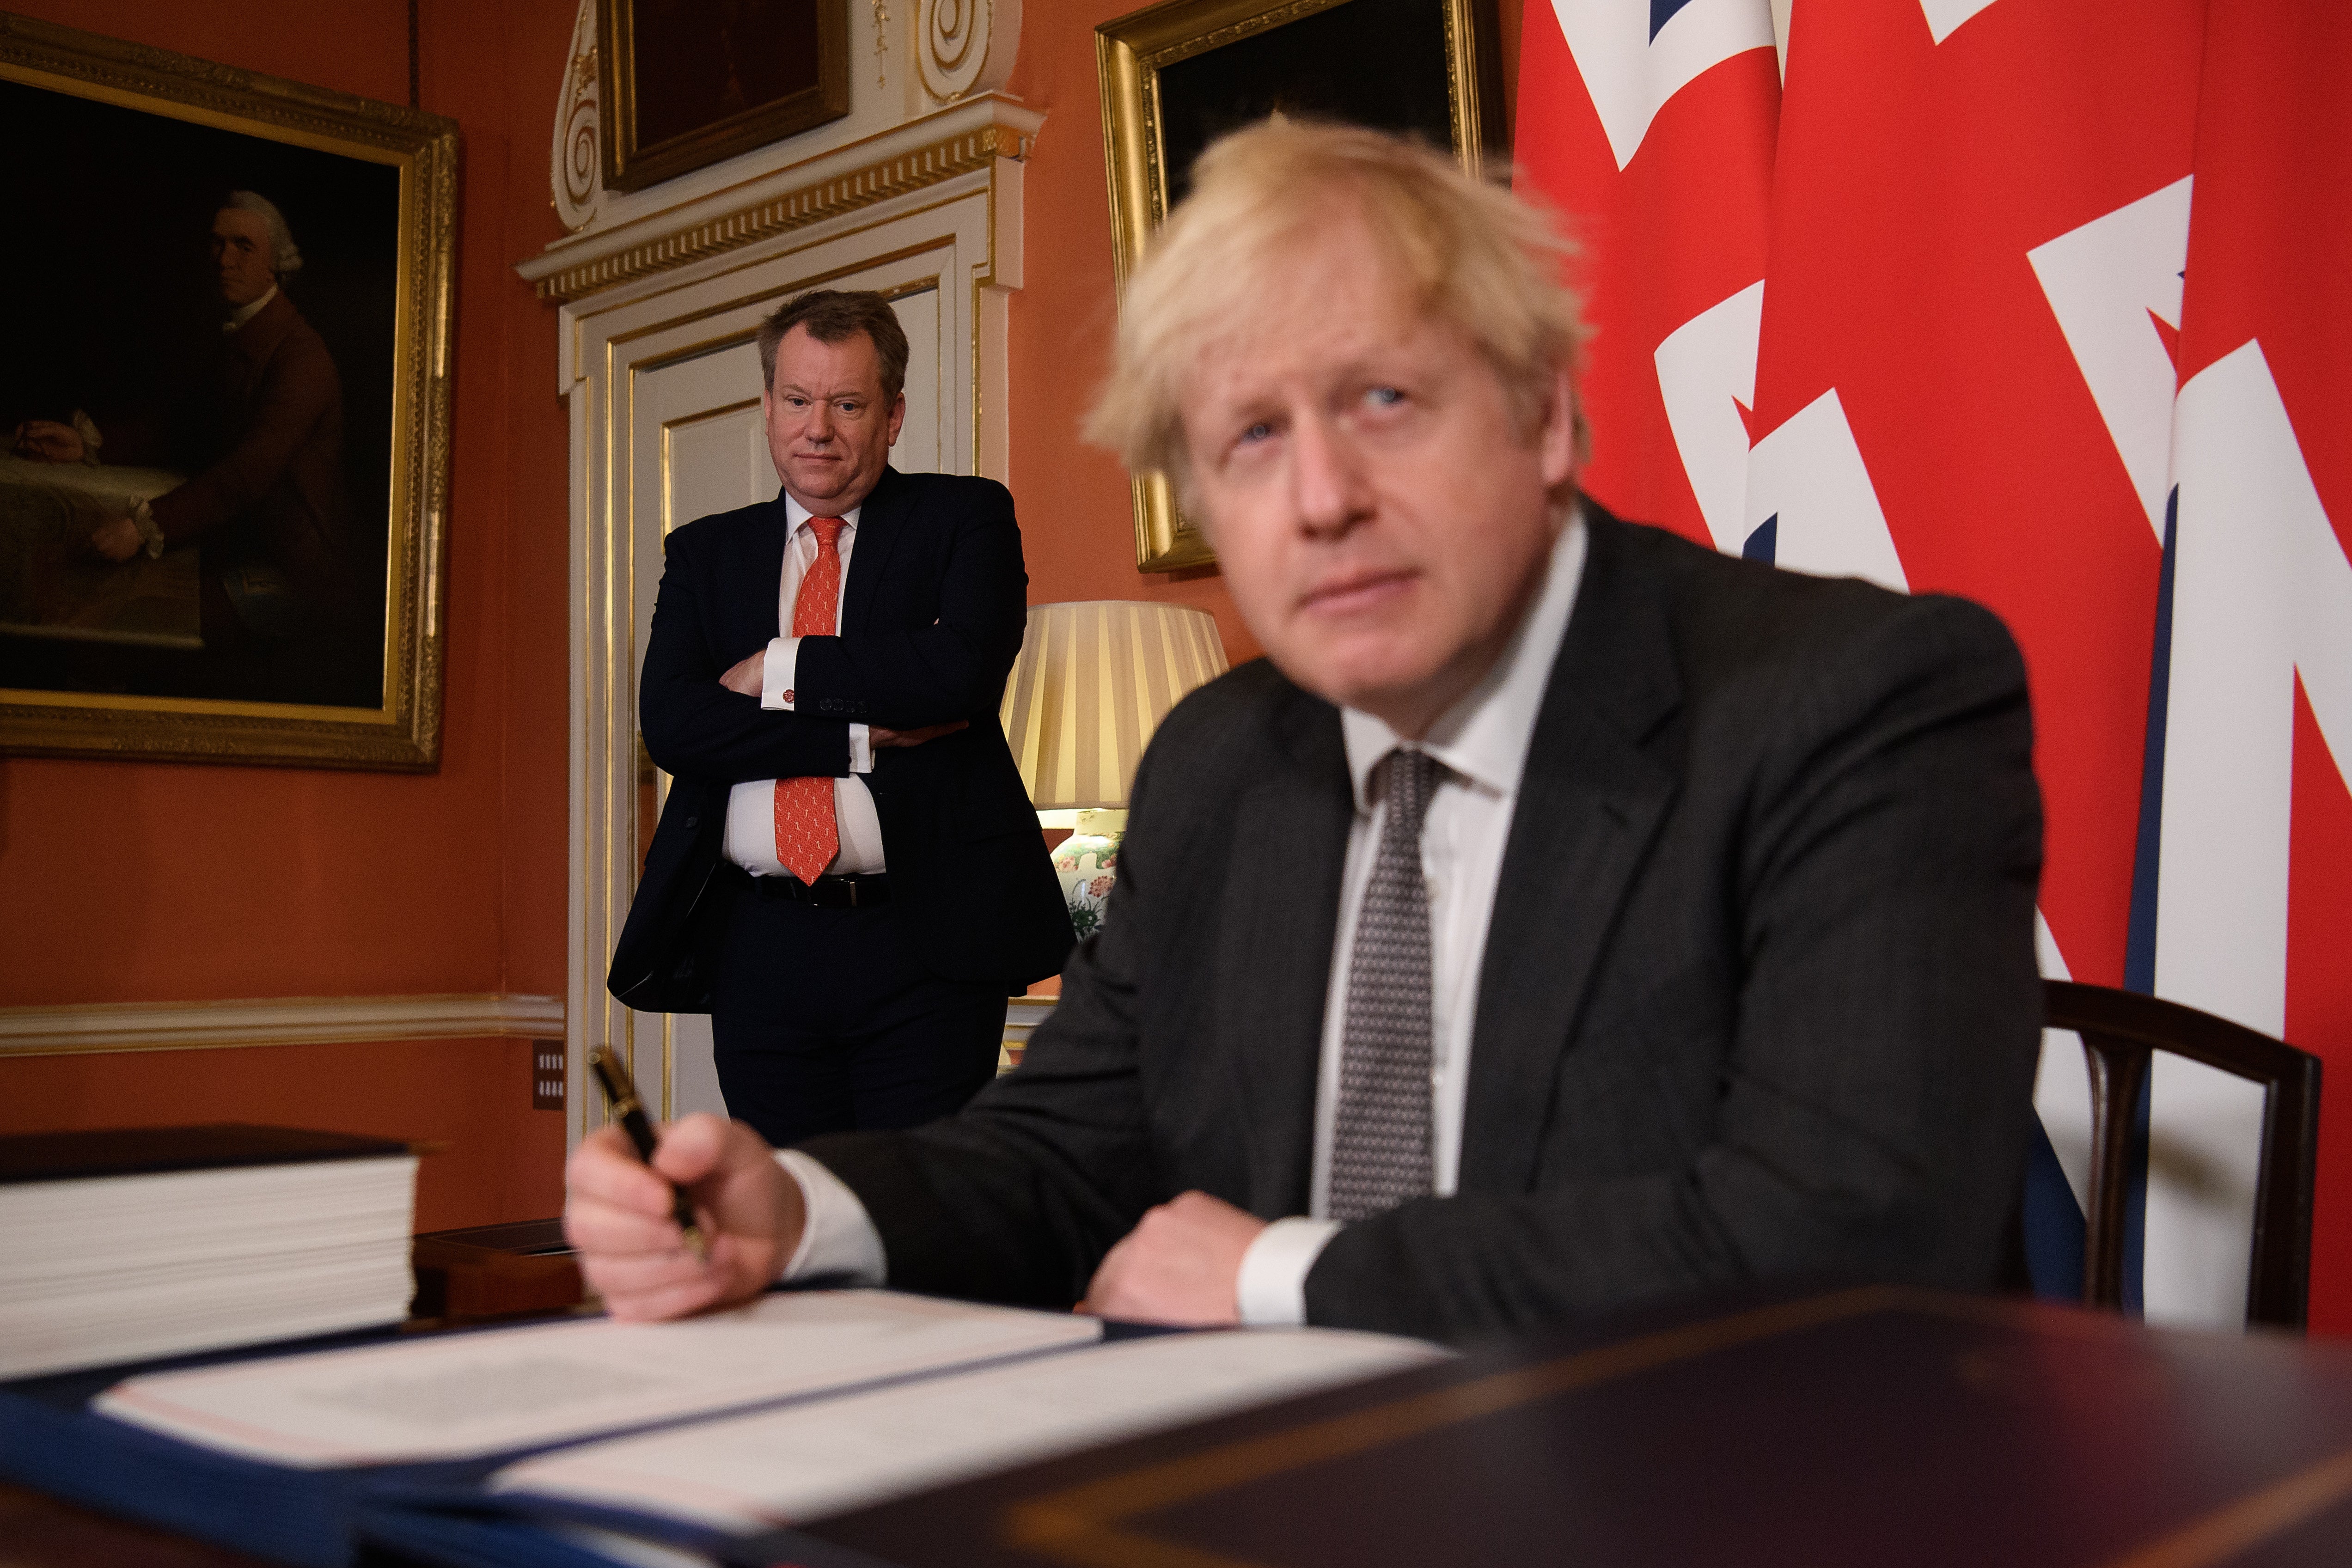 The EU has now accepted the position that the Boris Johnson’s government set out in the first place